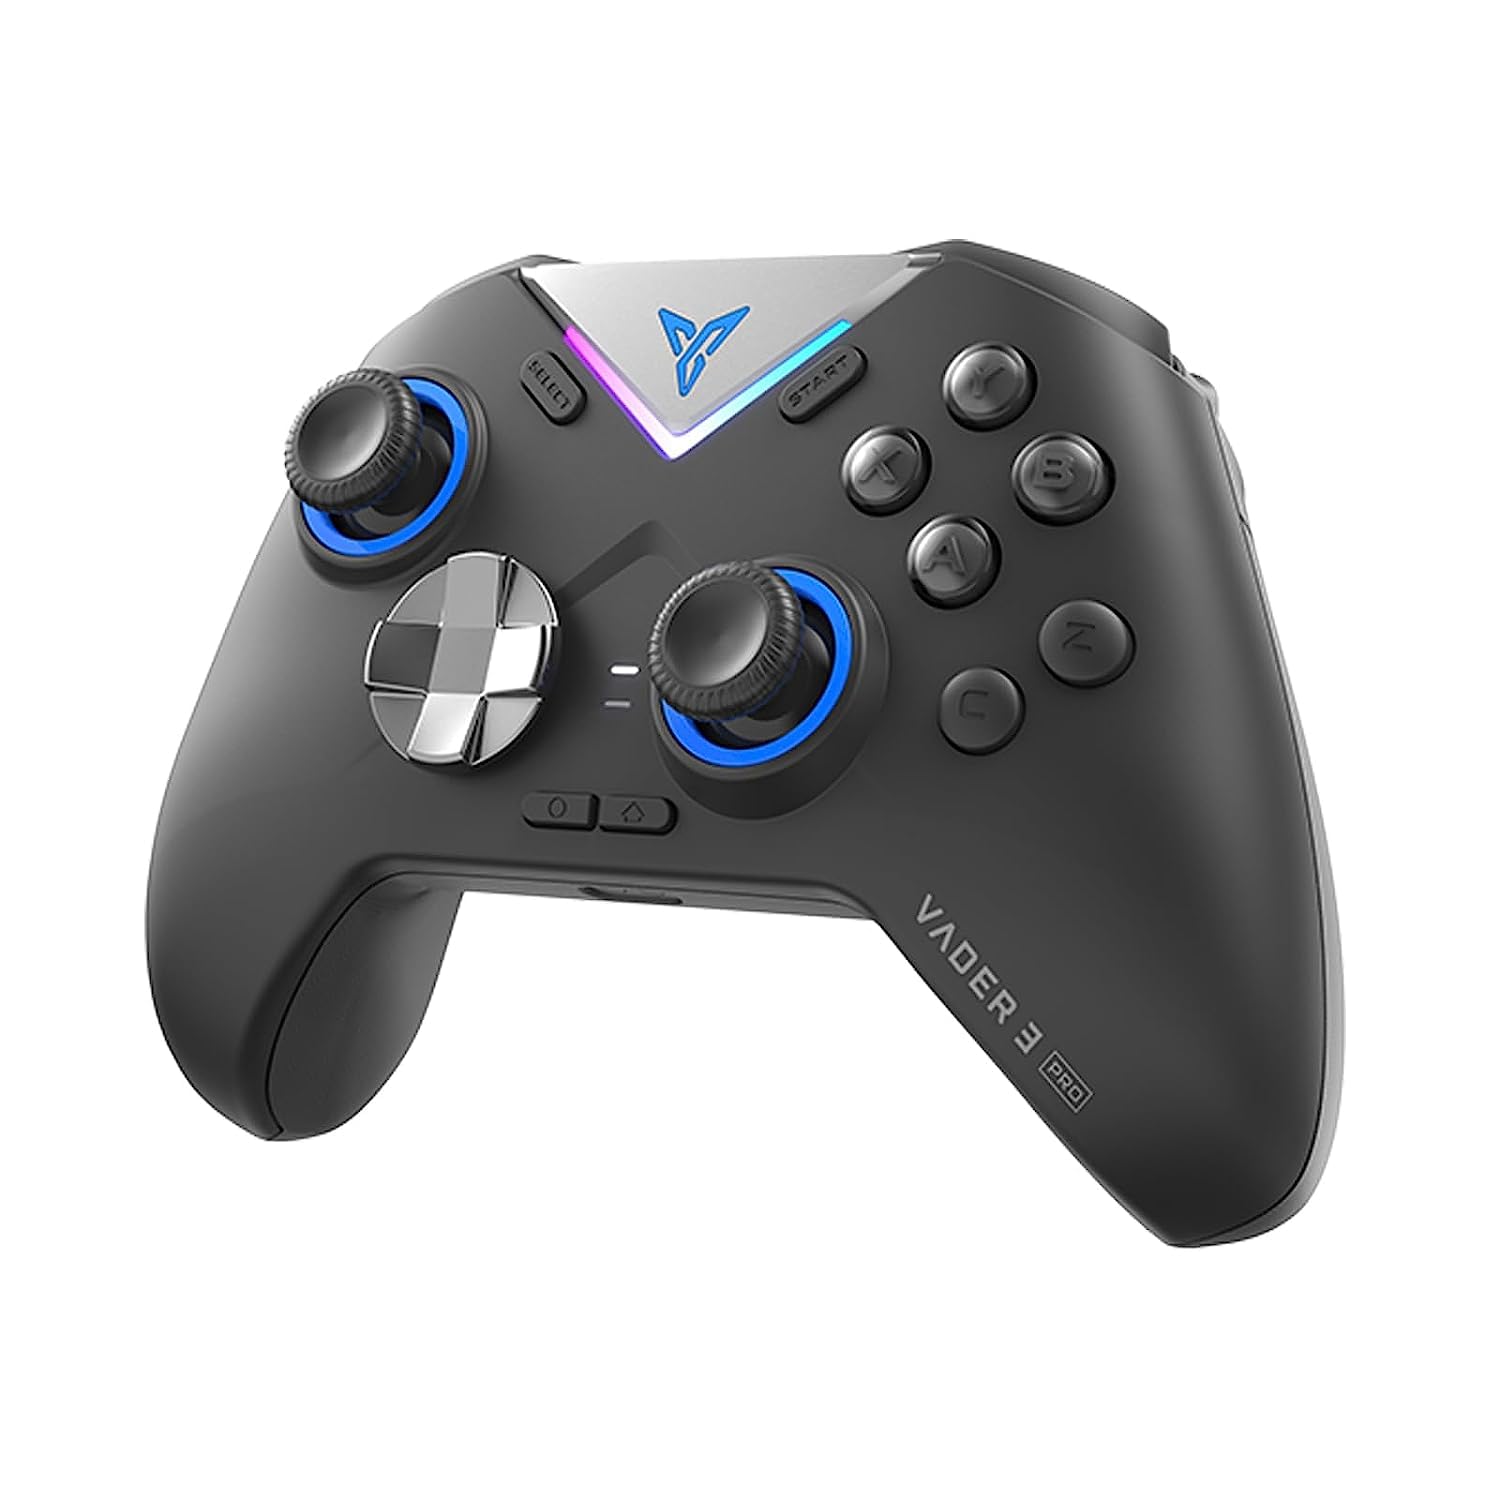 Flydigi Vader 3 Pro Wireless Game Controller, Dual-Motor Vibration Feedback, Hall Gaming Trigger and Microswitch Trigger Changeable, 3ms Ultra-Low Latency, 500Hz High Polling Rate, Multi-Platform Gaming controller for PC, Nintendo Switch, TV Box, Android